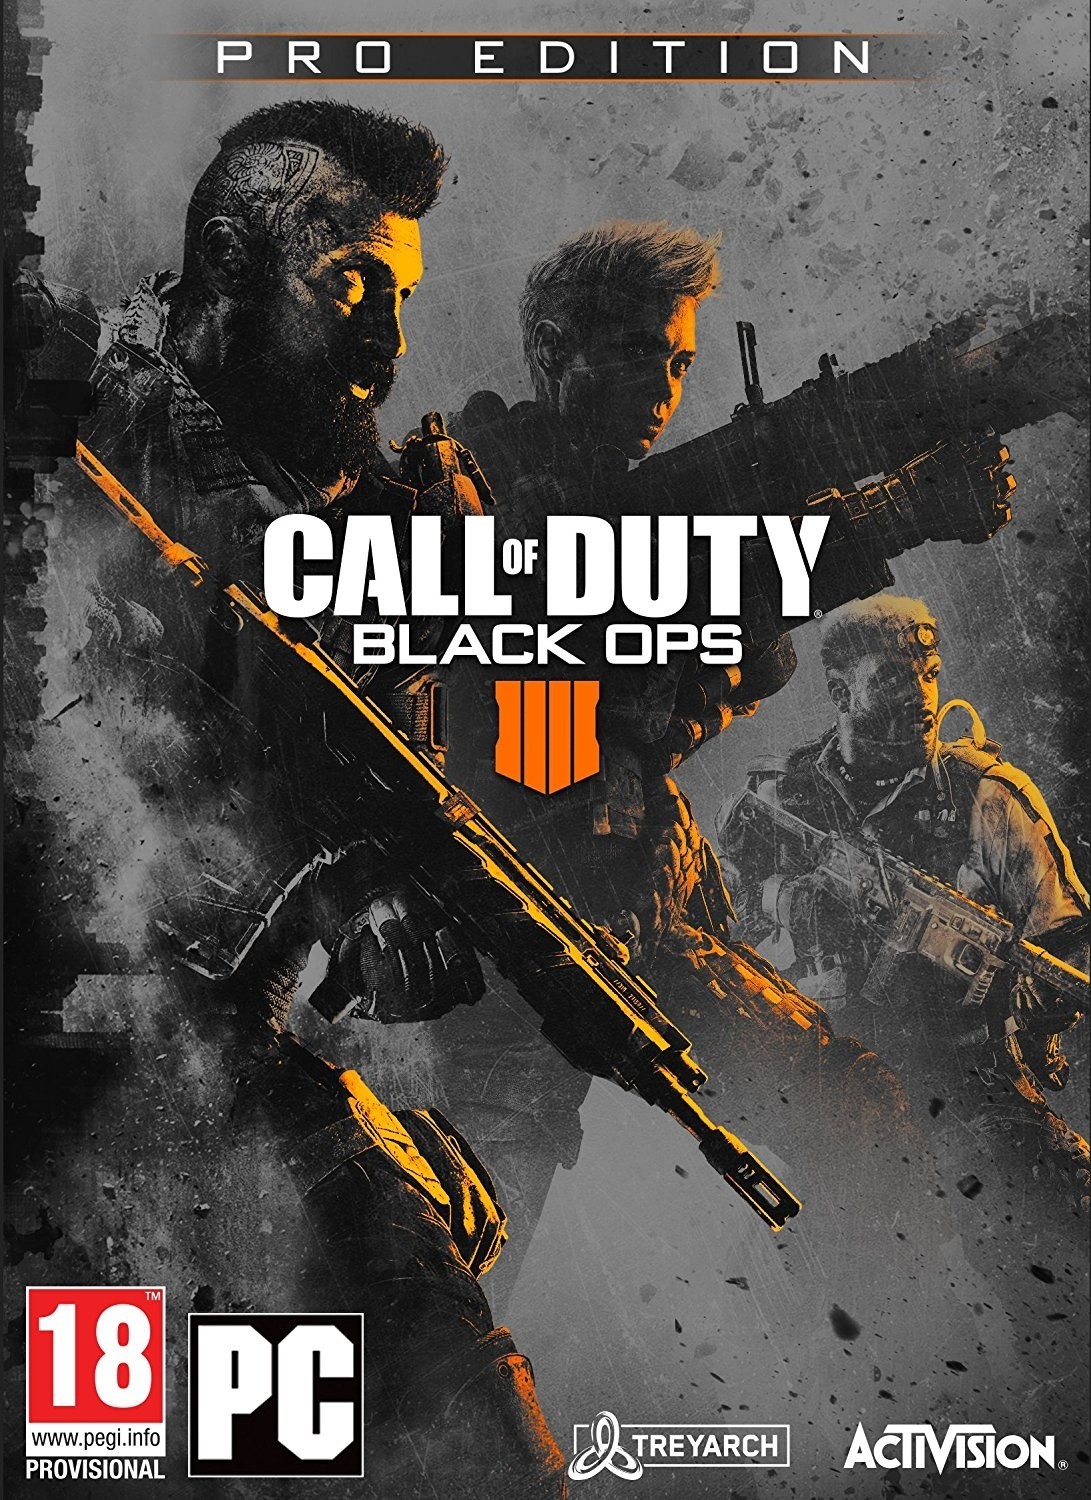 Call of Duty: Black Ops 4 - Pro Edition  (PC), Treyarch Studios